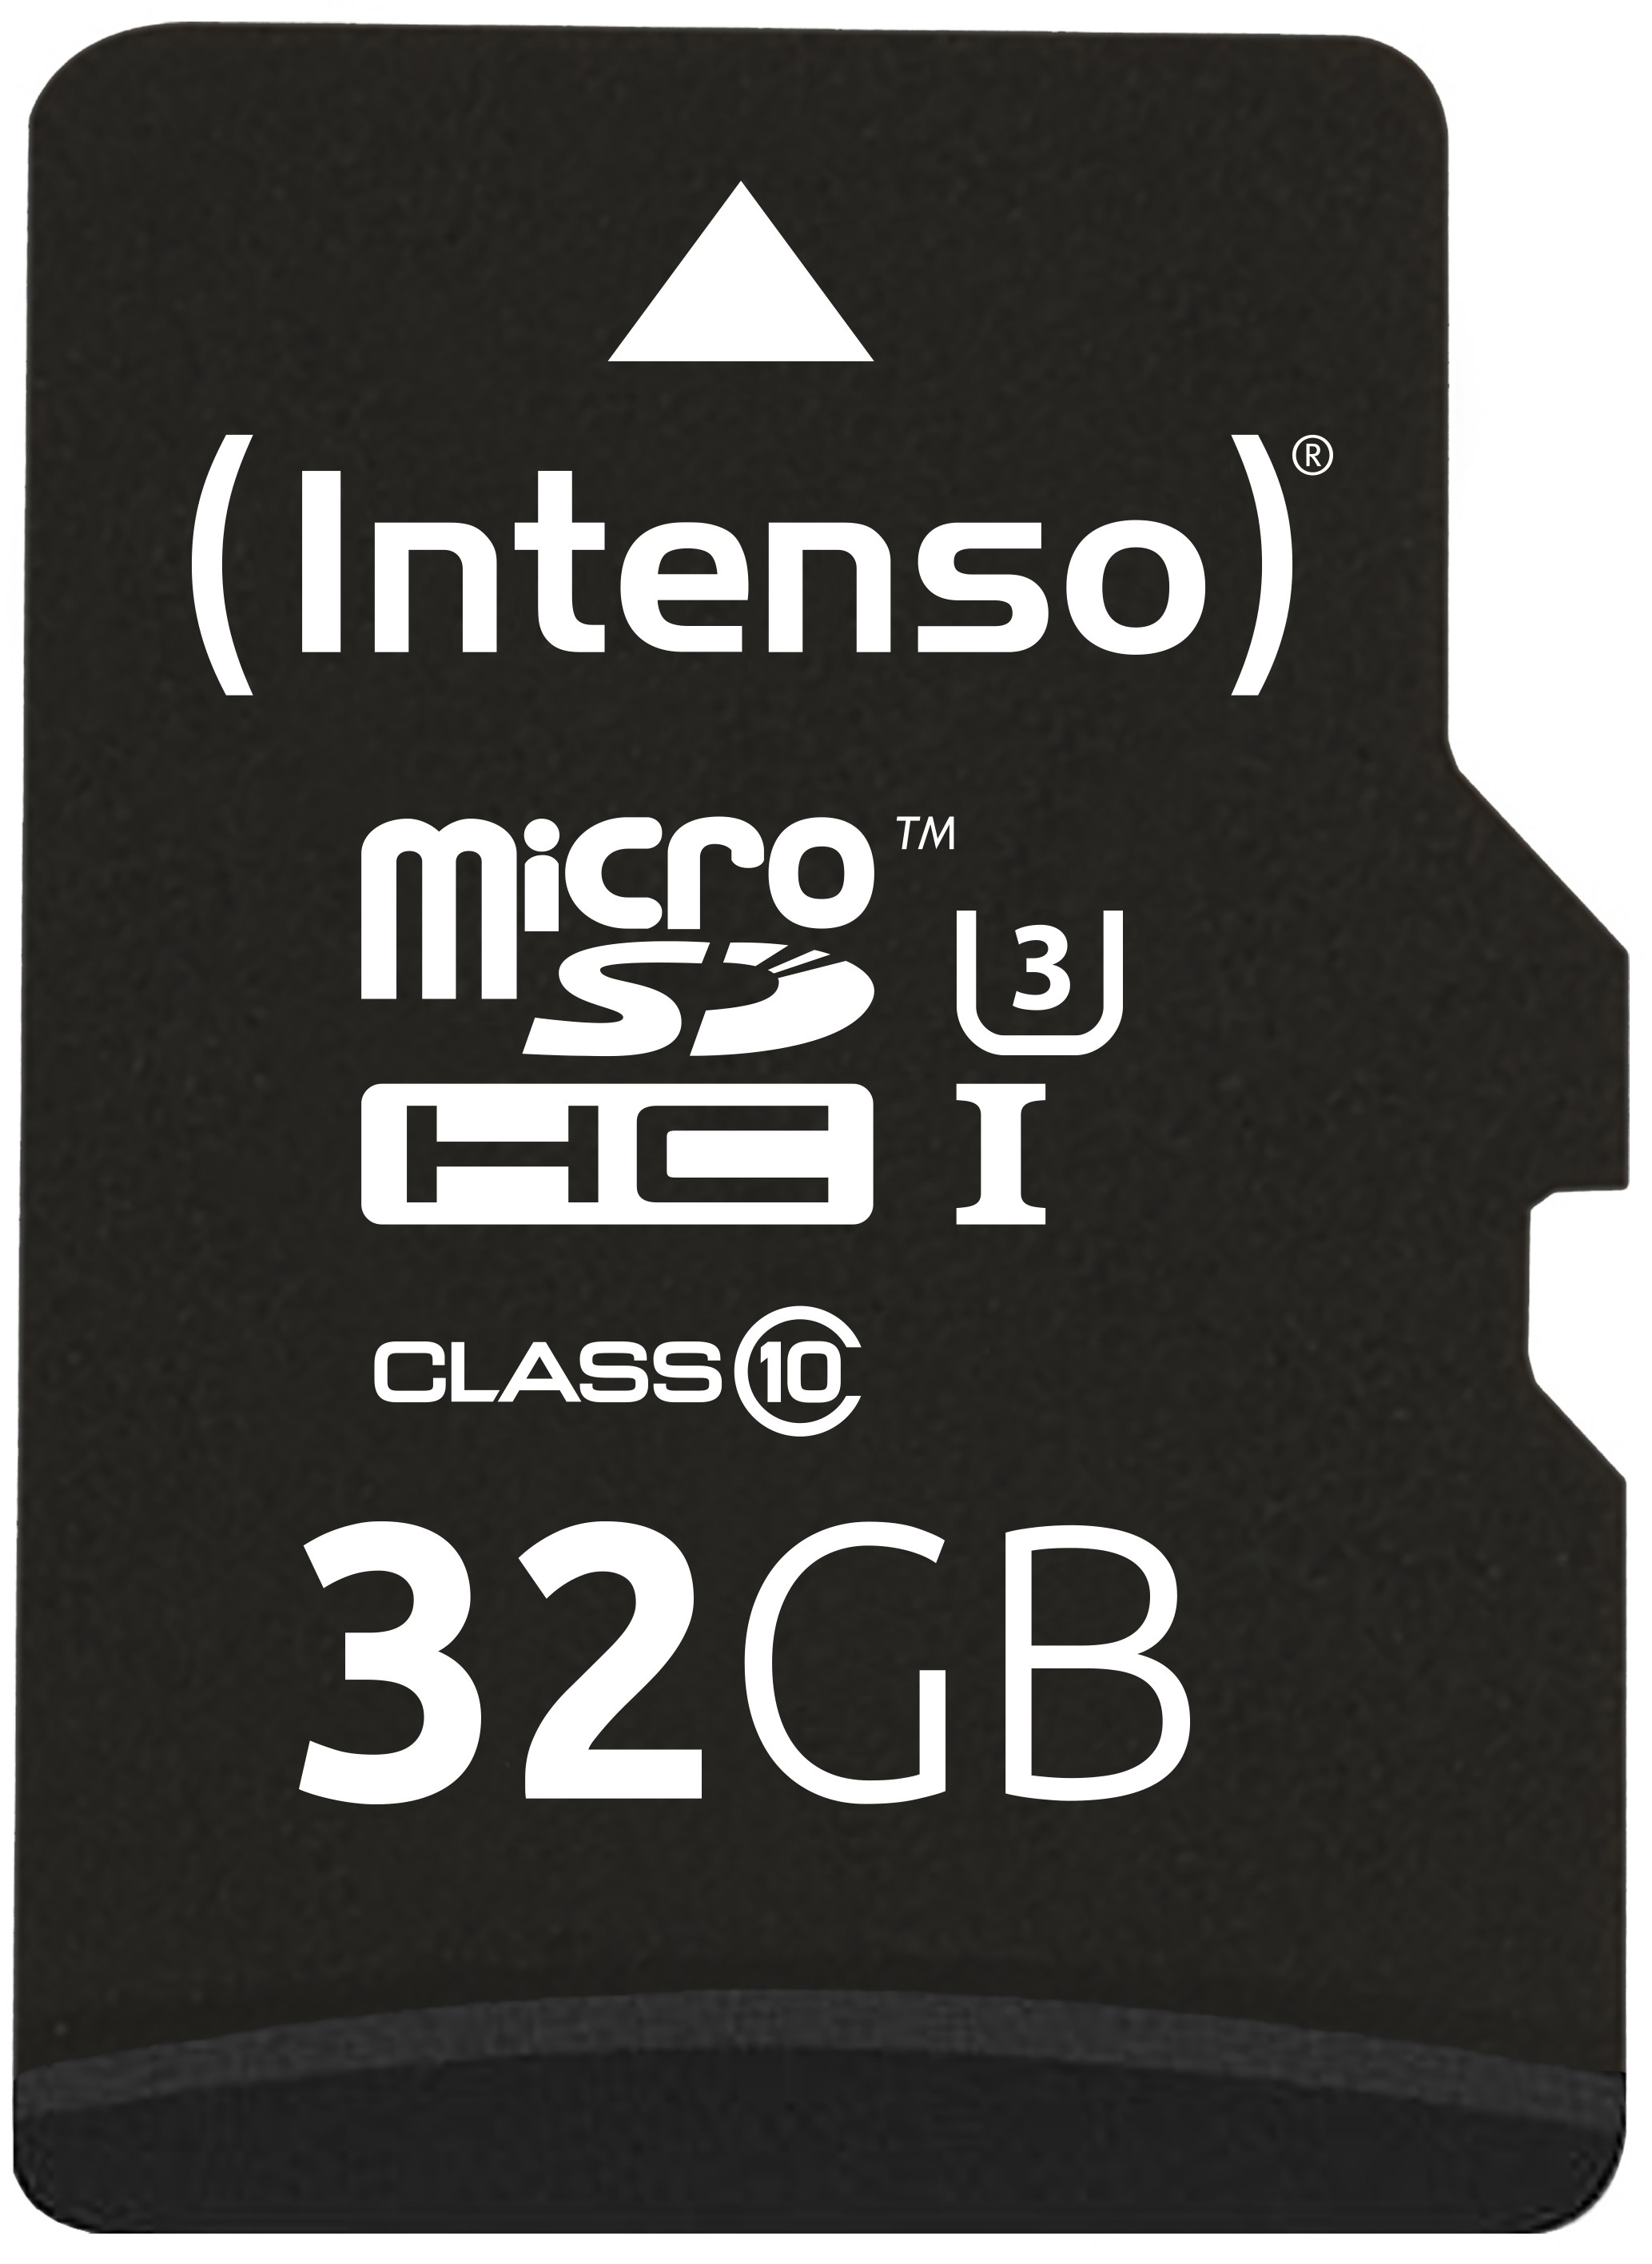 INTENSO Micro SDHC Card PRO 32GB 3433480 with adapter, UHS-I